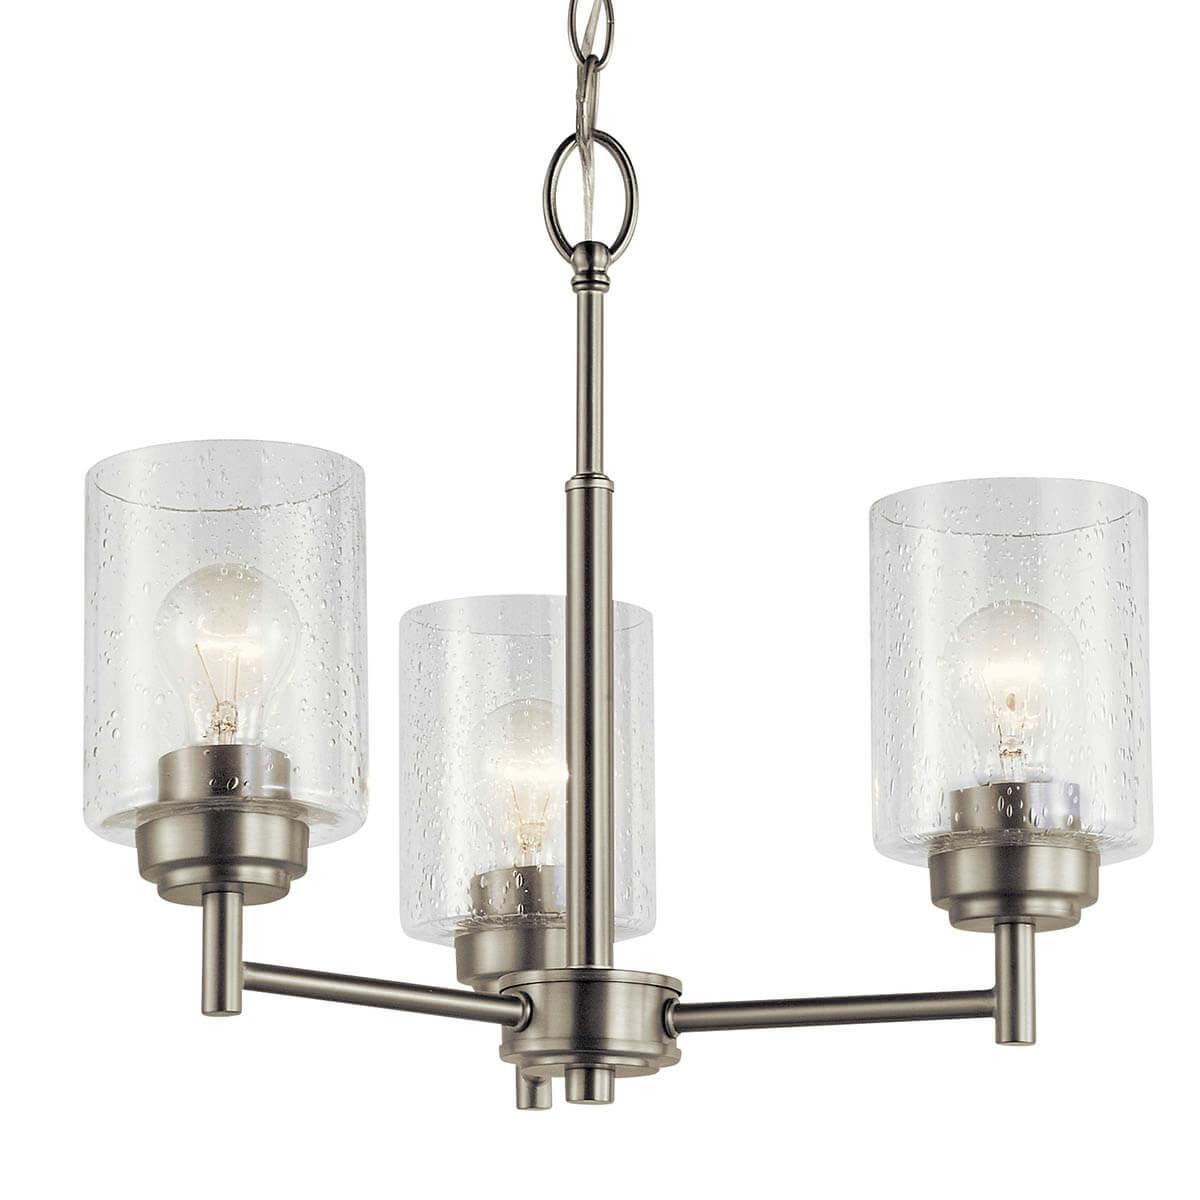 Winslow™ 3 Light Mini Chandelier Brushed Nickel on a white background